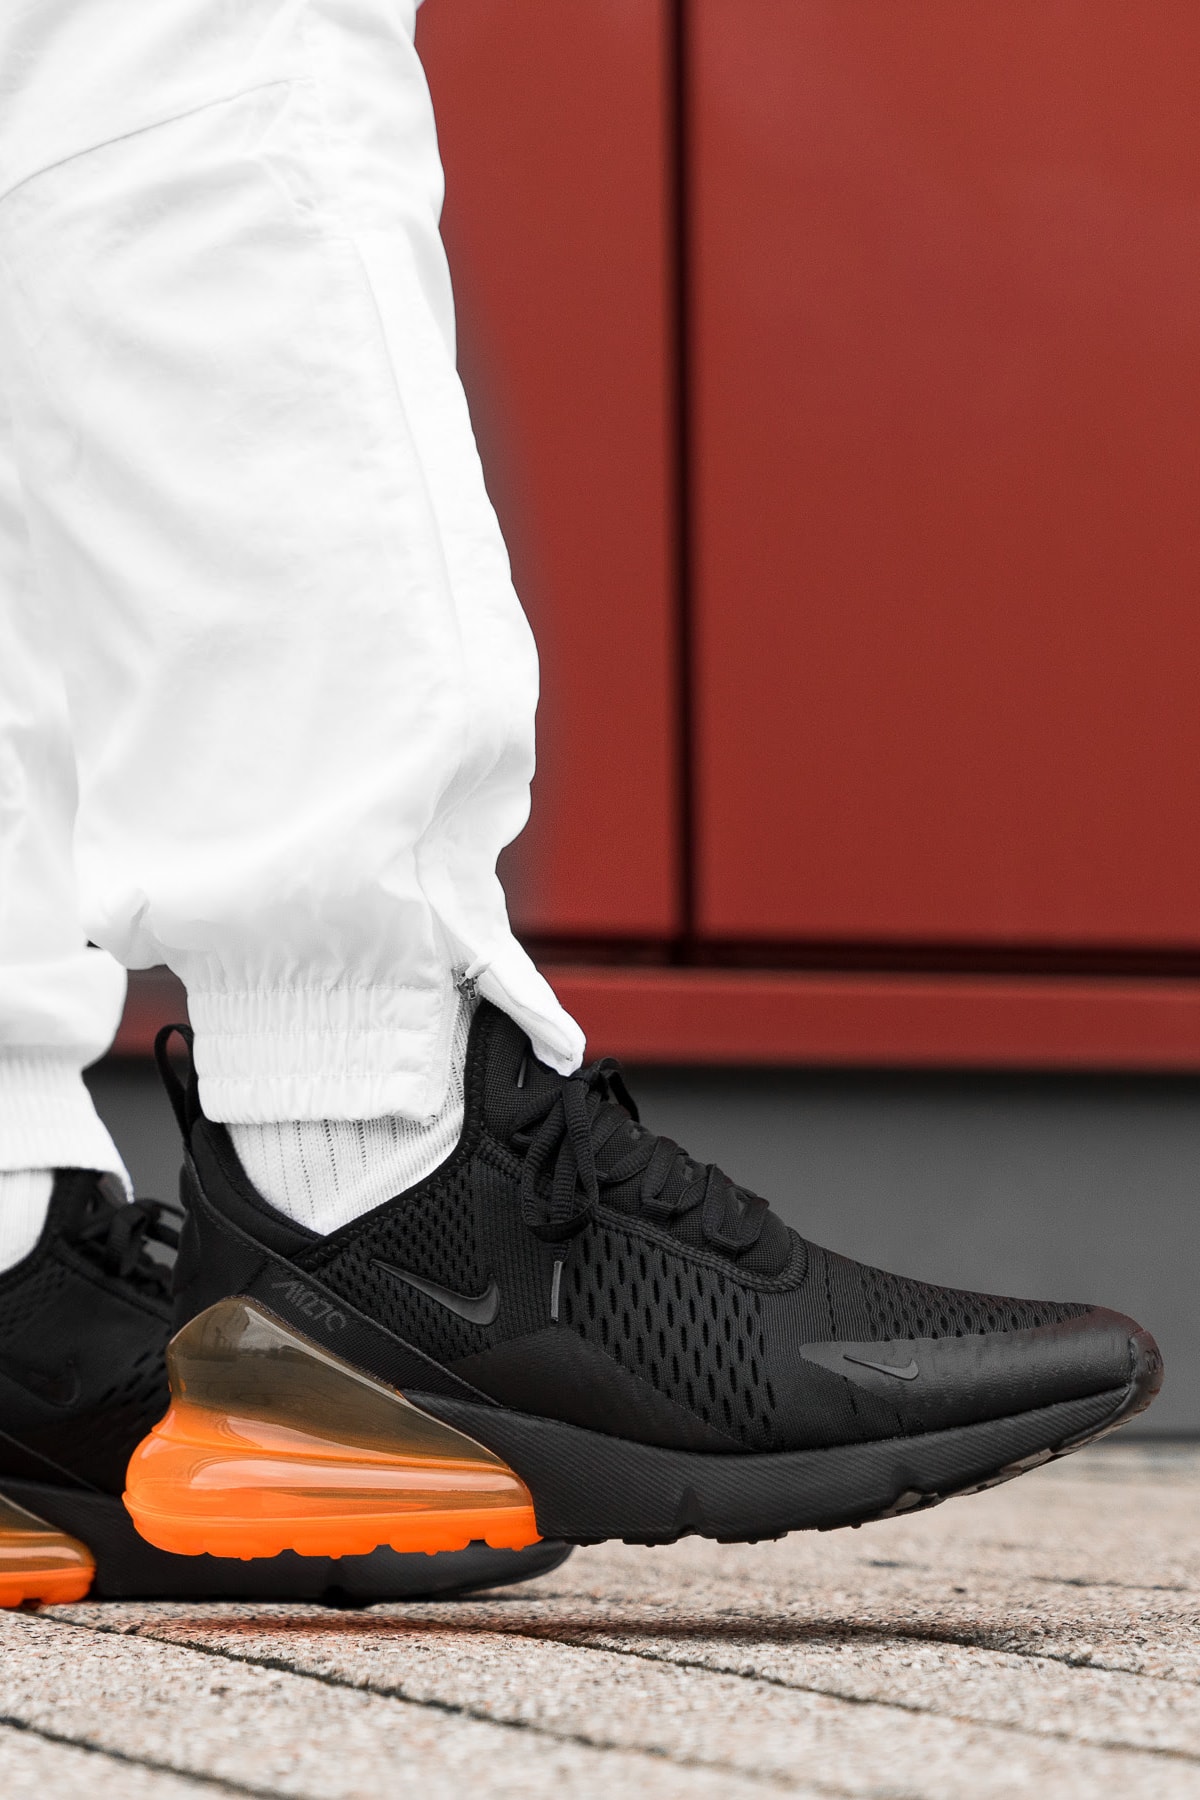 NIKE AIR MAX 270 REVIEW - ON FEET